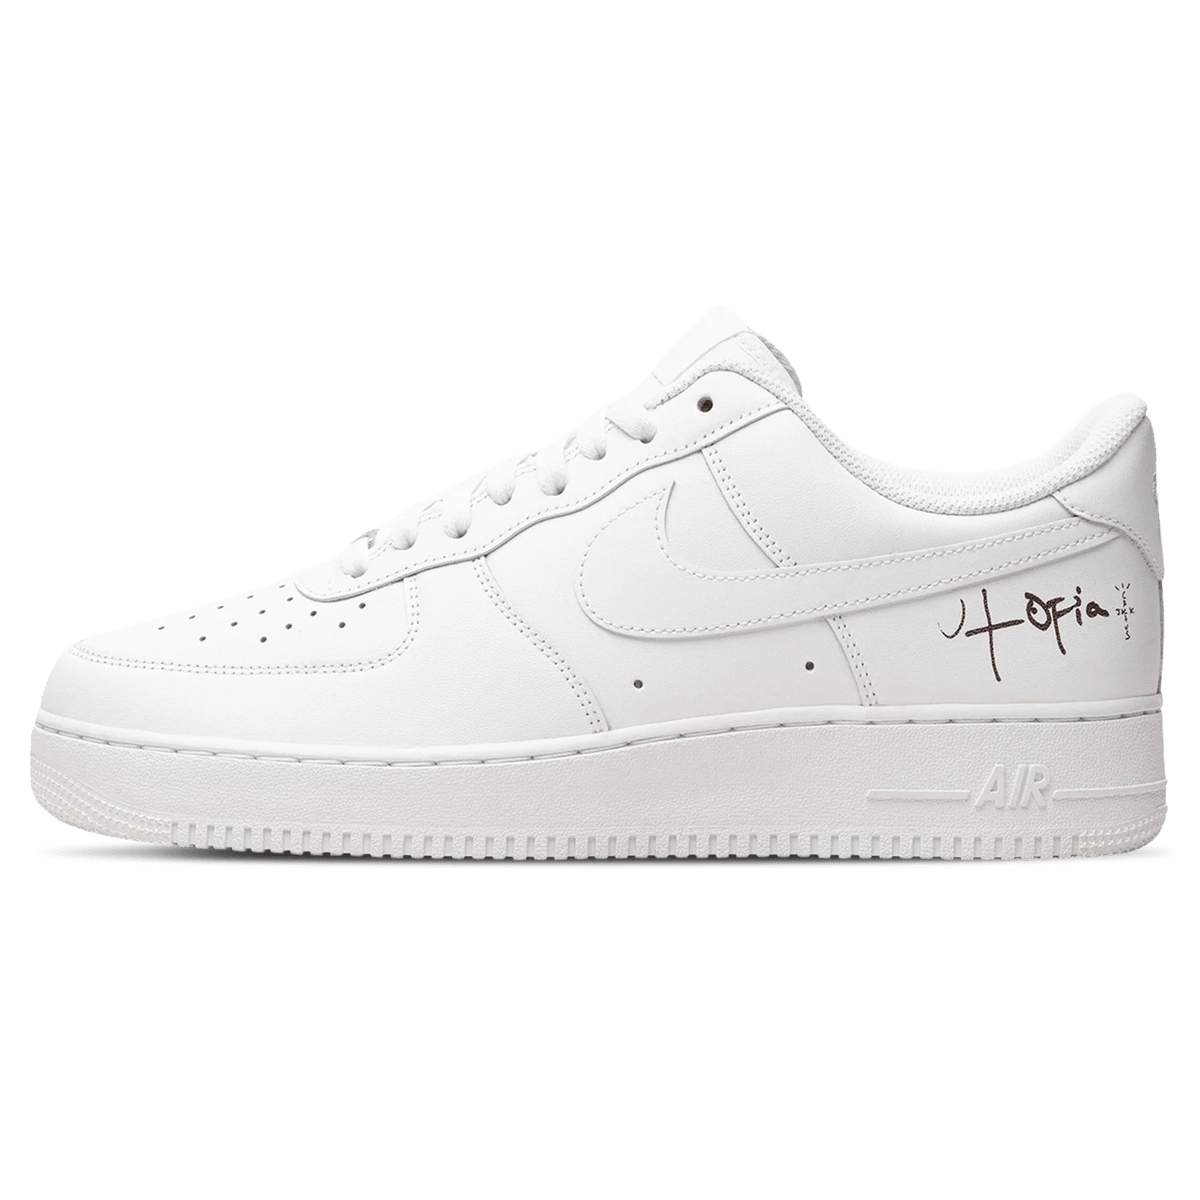 nike Trainers air force 1 shadow particle grey ck6561 100 release date info x Travis Scott 'Utopia' - CerbeShops